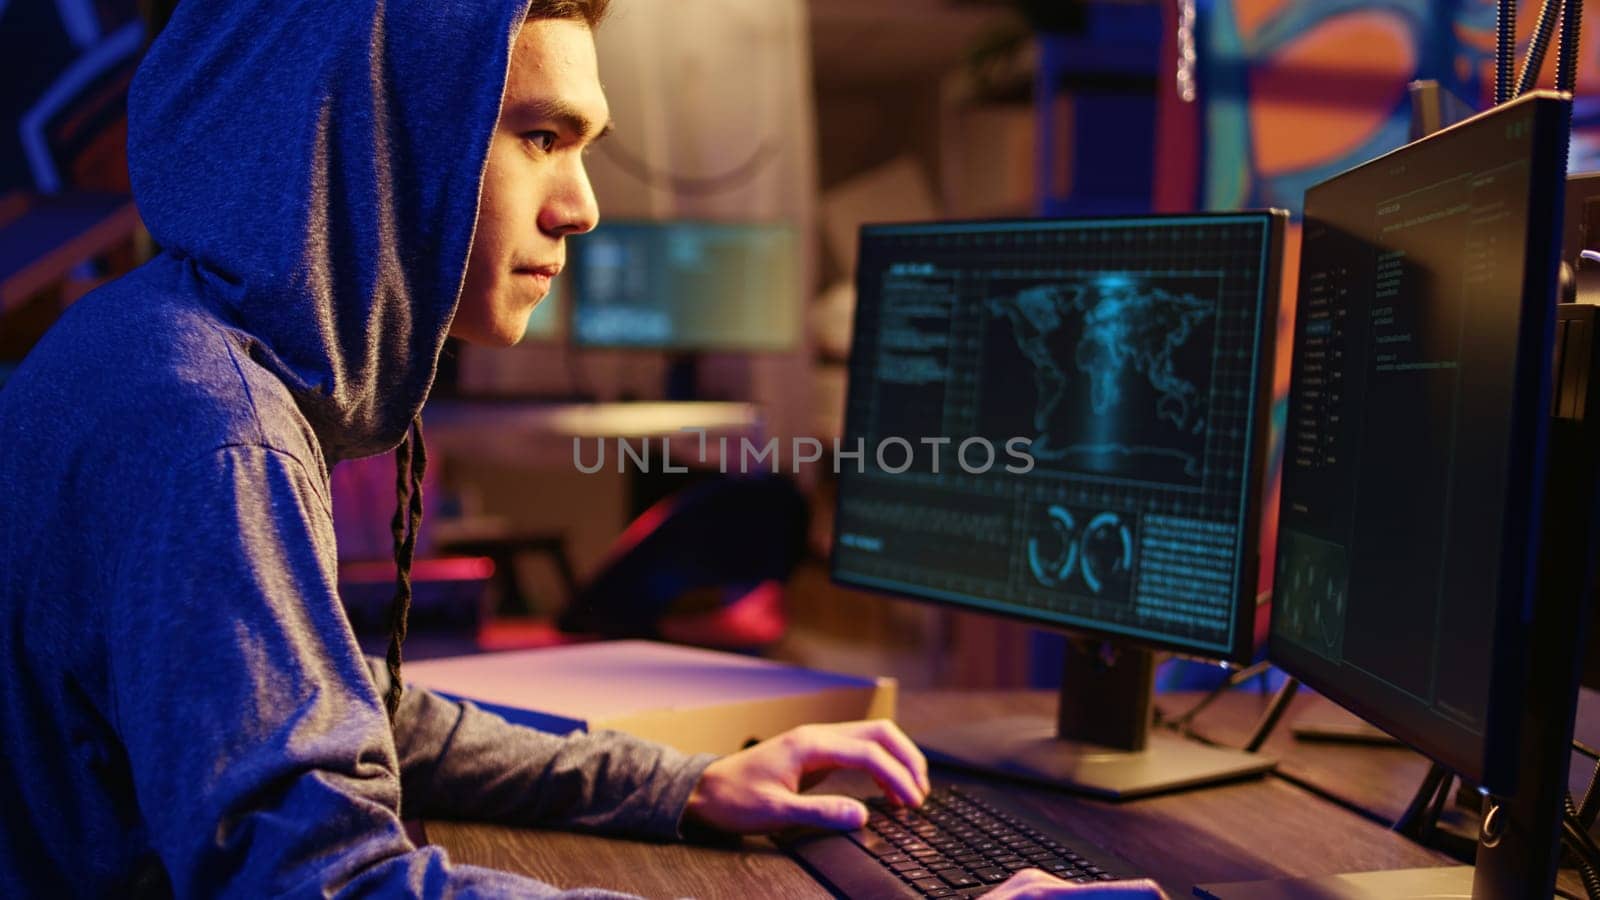 Asian hacker doing international espionage warfare for his government to steal state secrets from another countries, anxiously looking over shoulder, afraid of being caught and going to jail